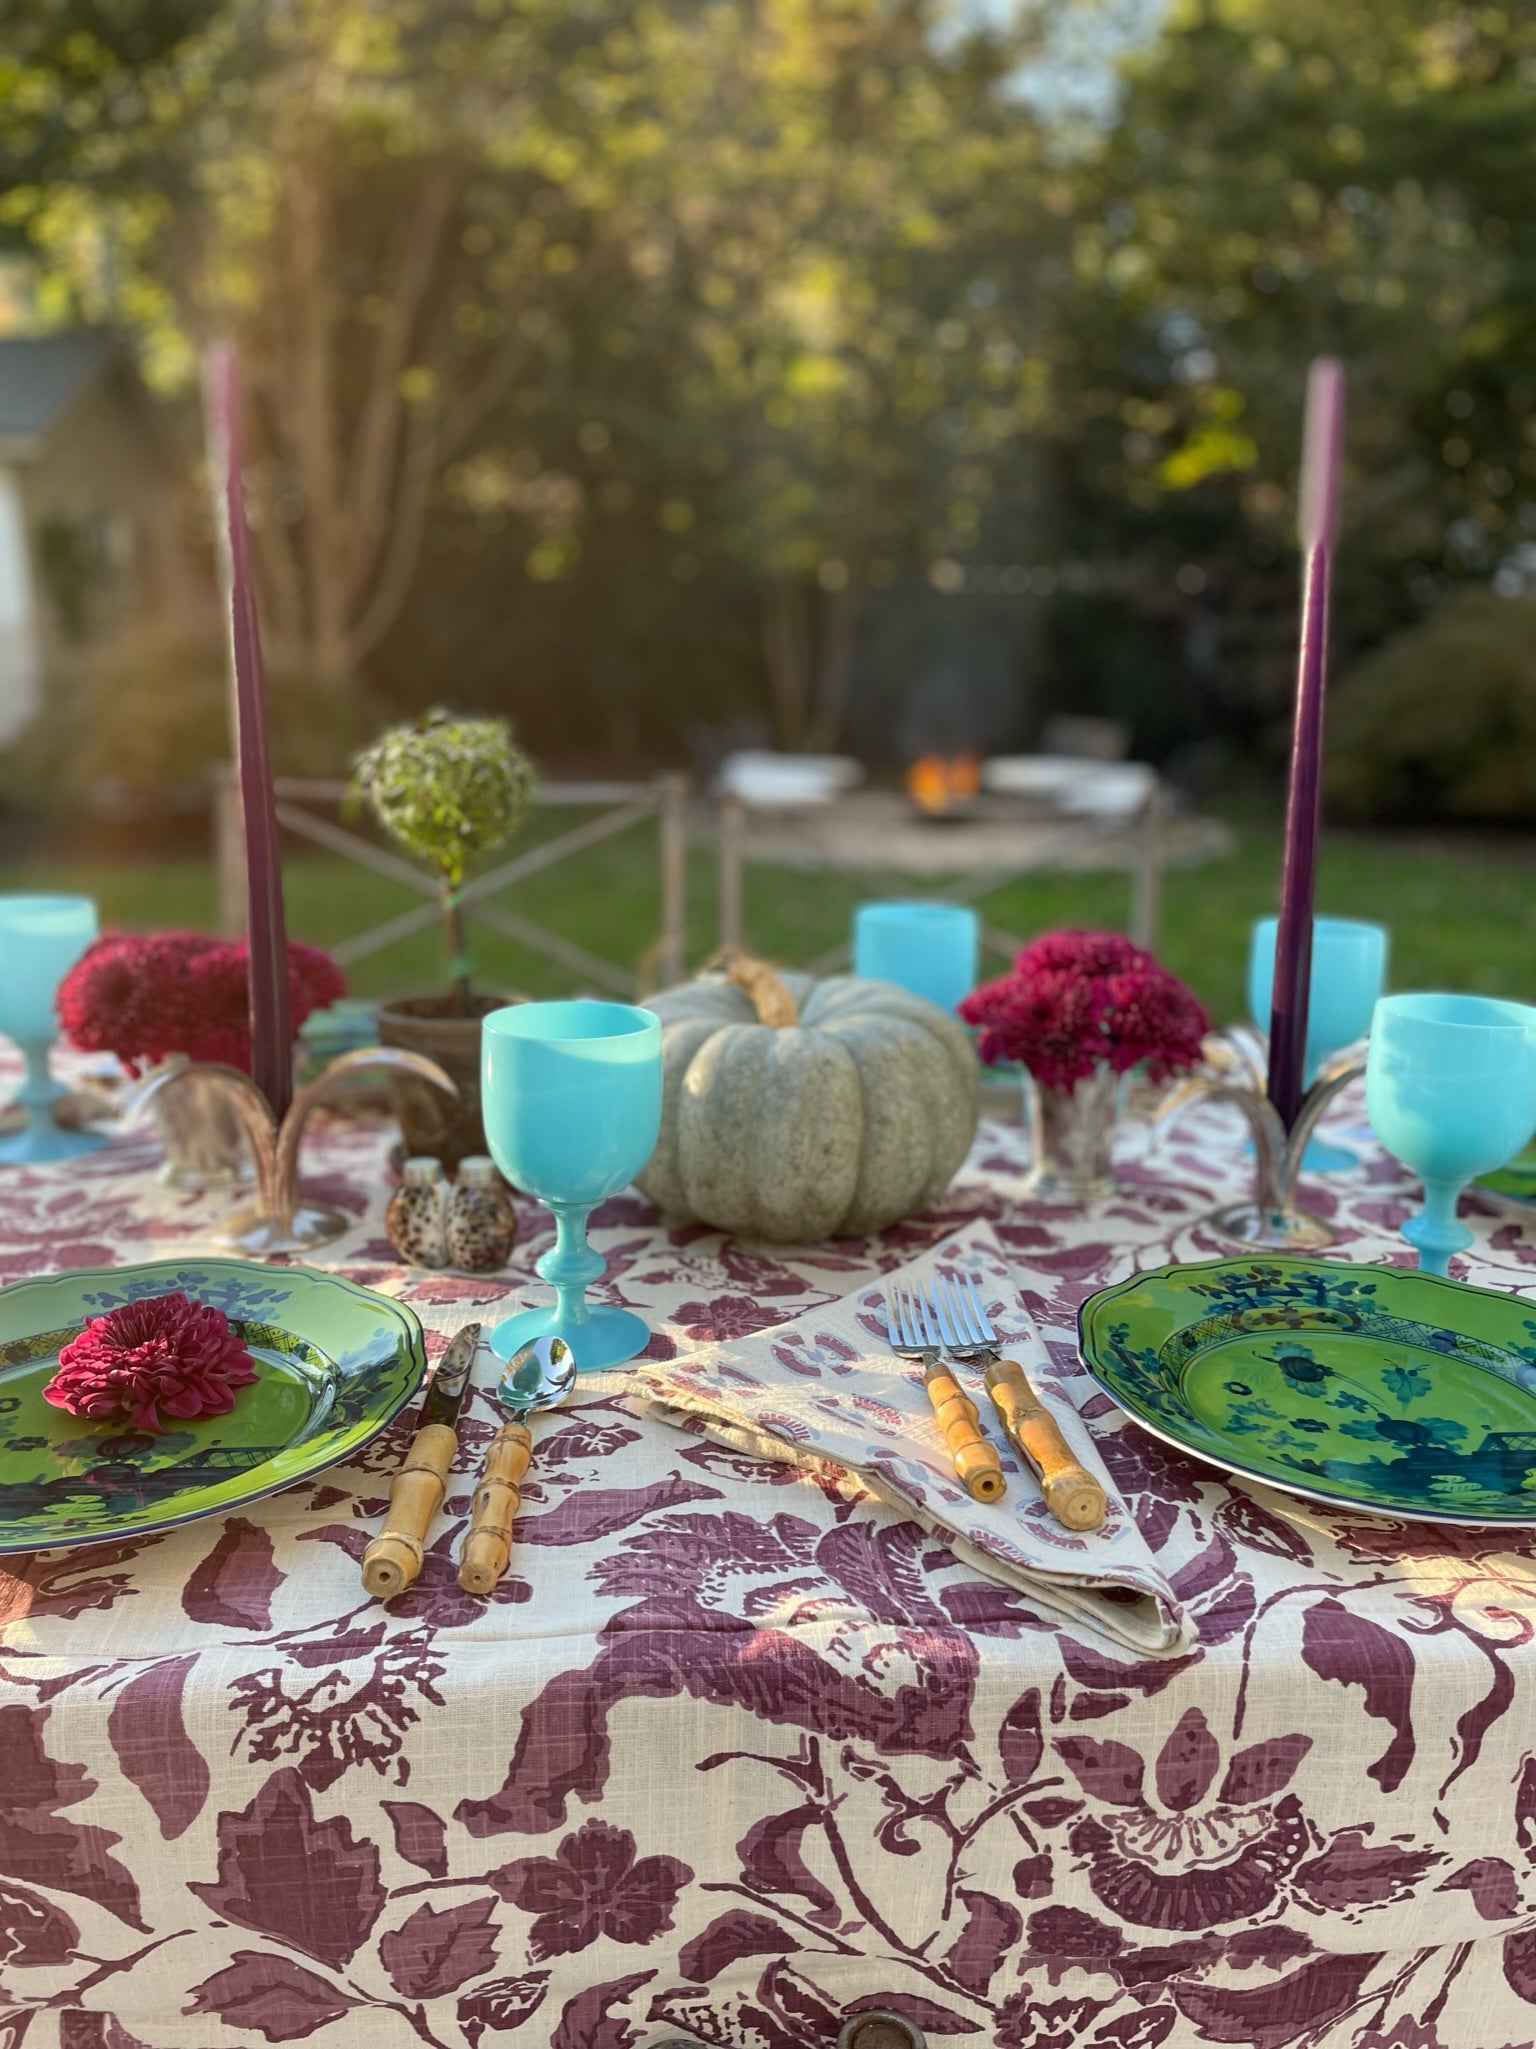 Tablescape by Elly P. Cooper of Elly Poston Interiors